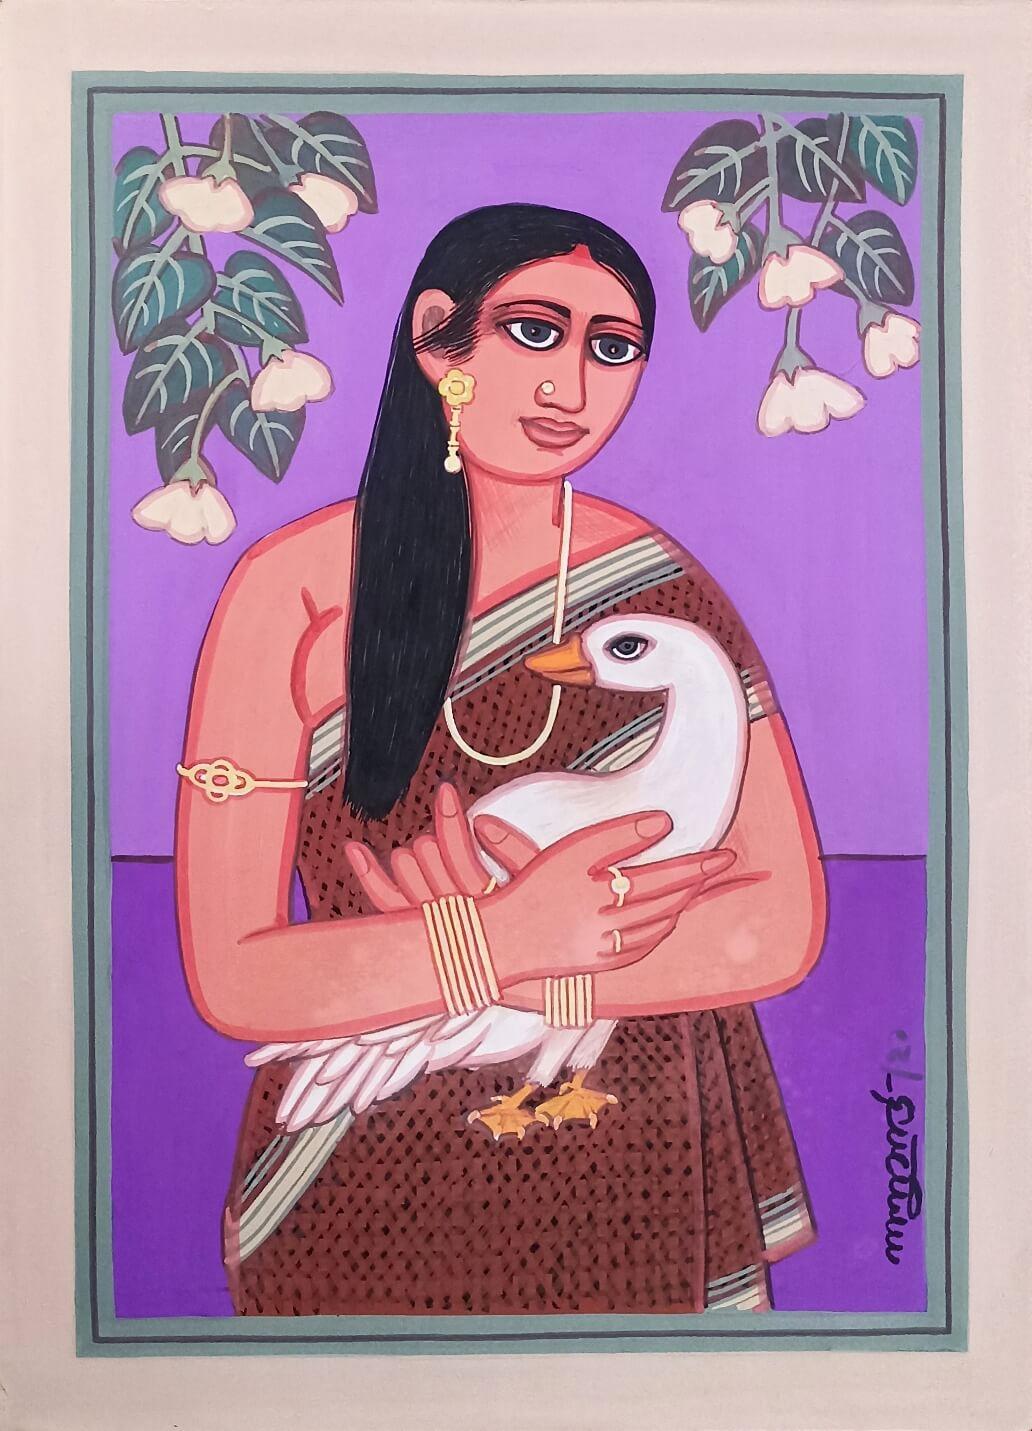 Lalu Prasad Shaw - Bibi - 15 x 22 inches
Tempera on Board, 2020
(Unframed & Delivered)

Style : Known widely for his highly stylized portraits of Bengali women and couples, Lalu Prasad Shaw’s works lay the most emphasis on his subject’s physical